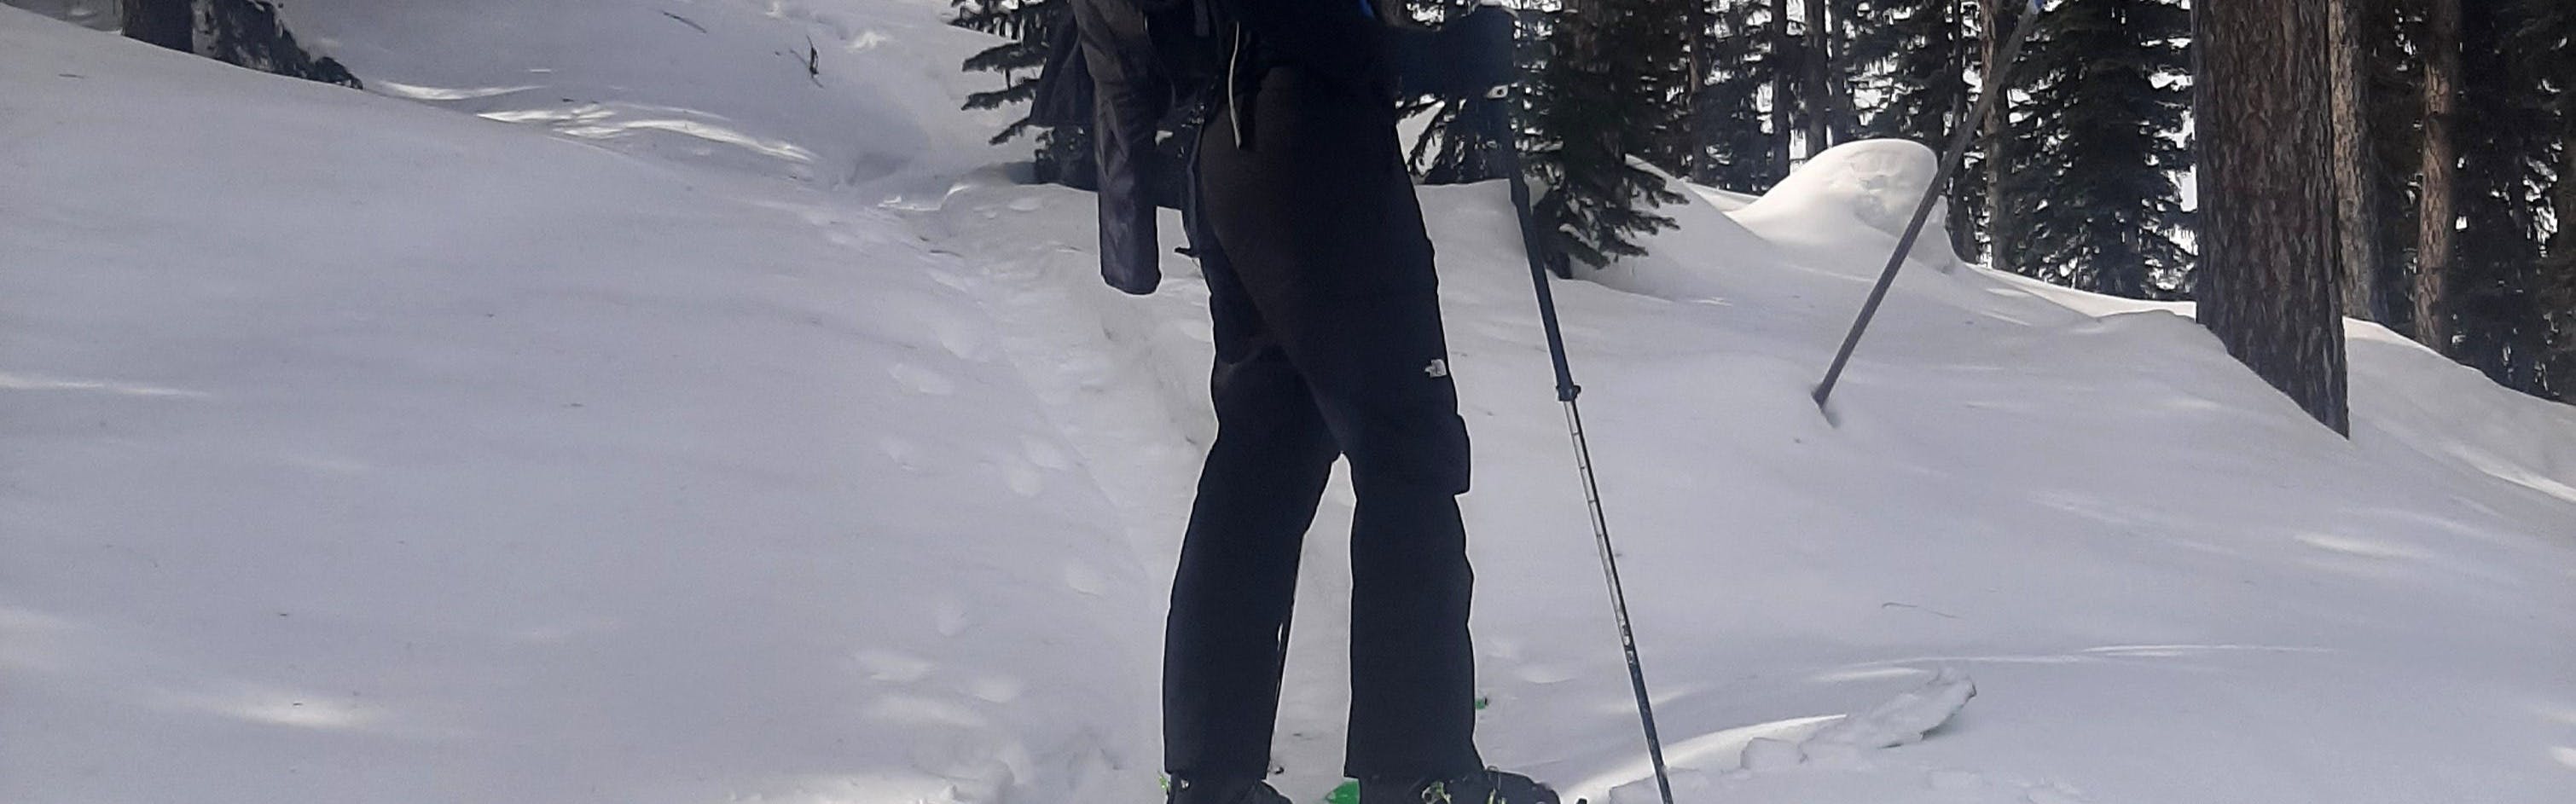 THE NORTH FACE Women's Freedom Insulated Snow Ski Pants Review